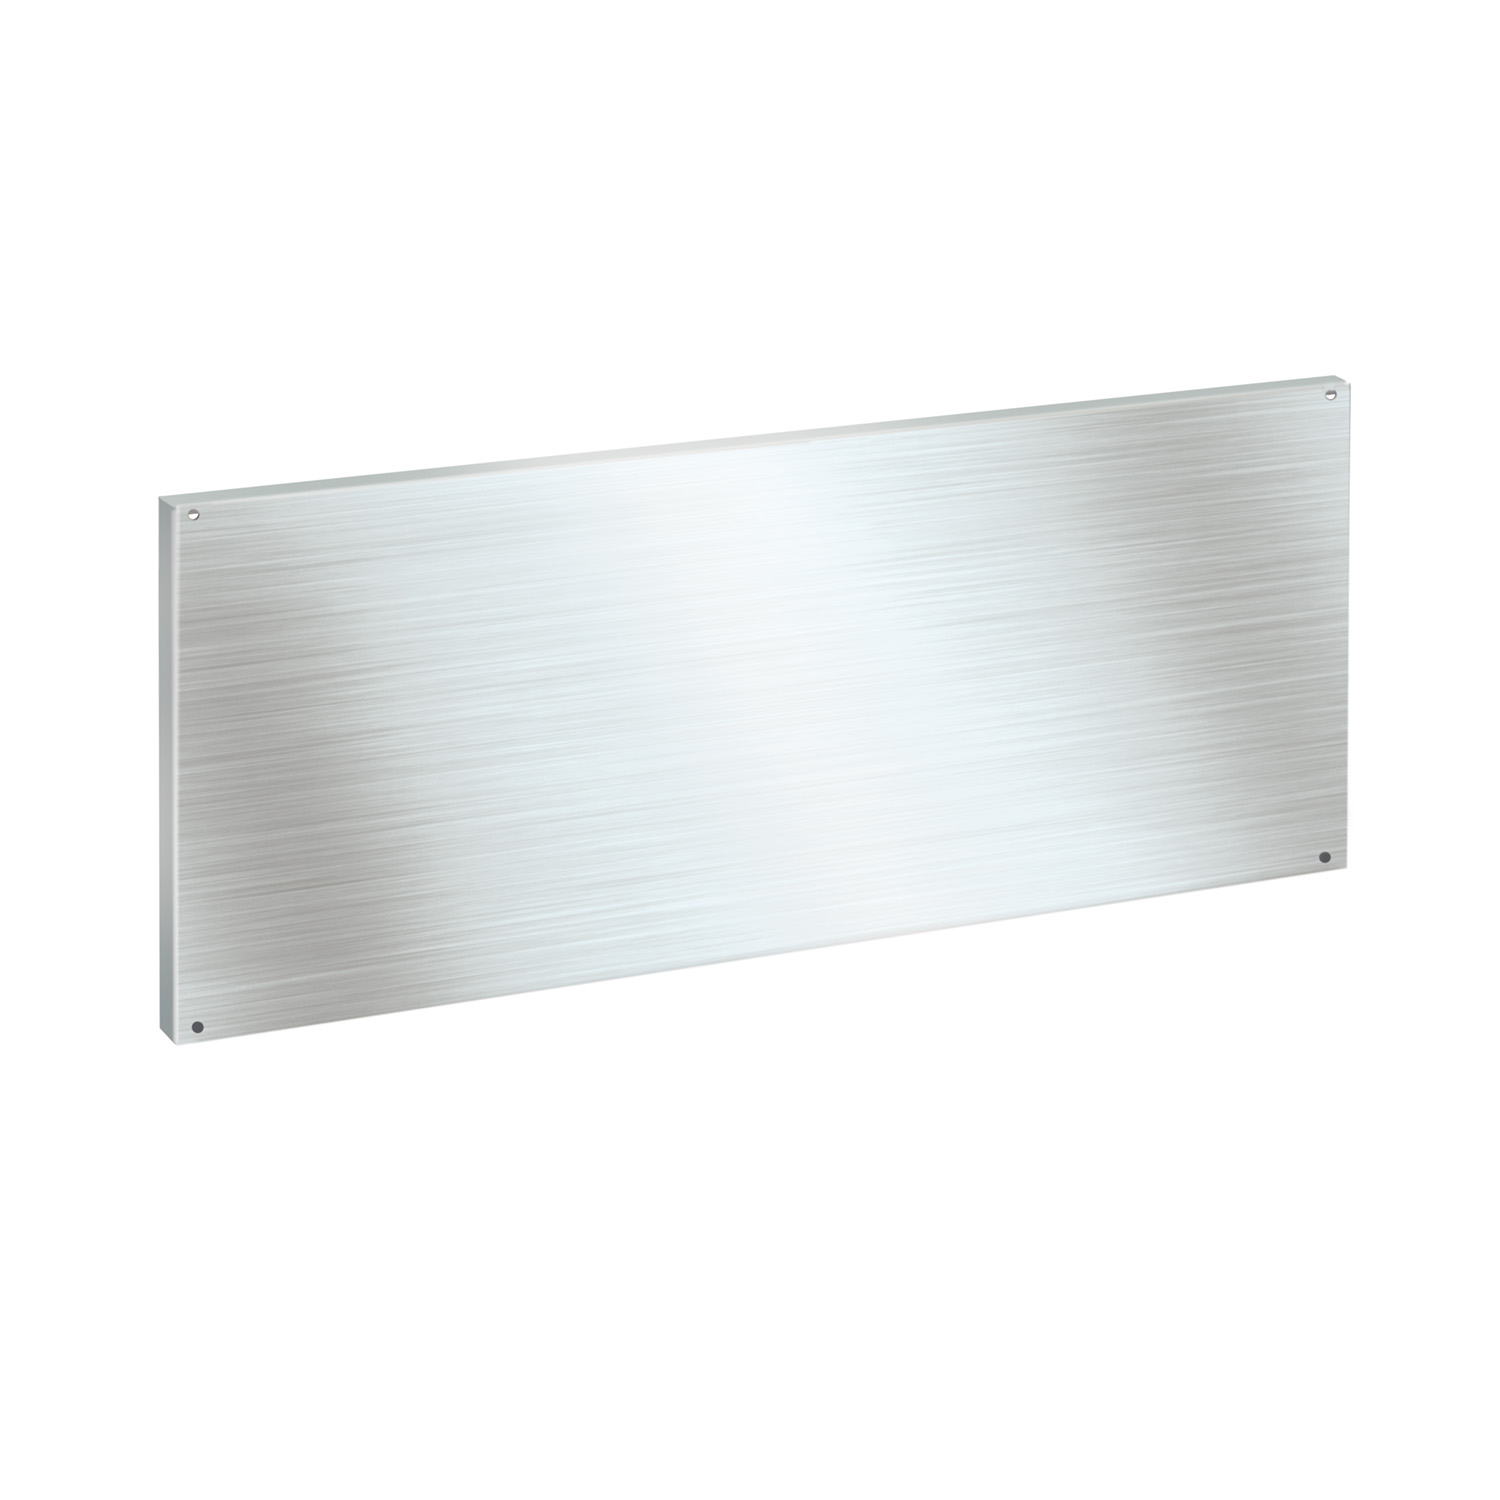 Stainless steel back panel (440 x 1200mm)